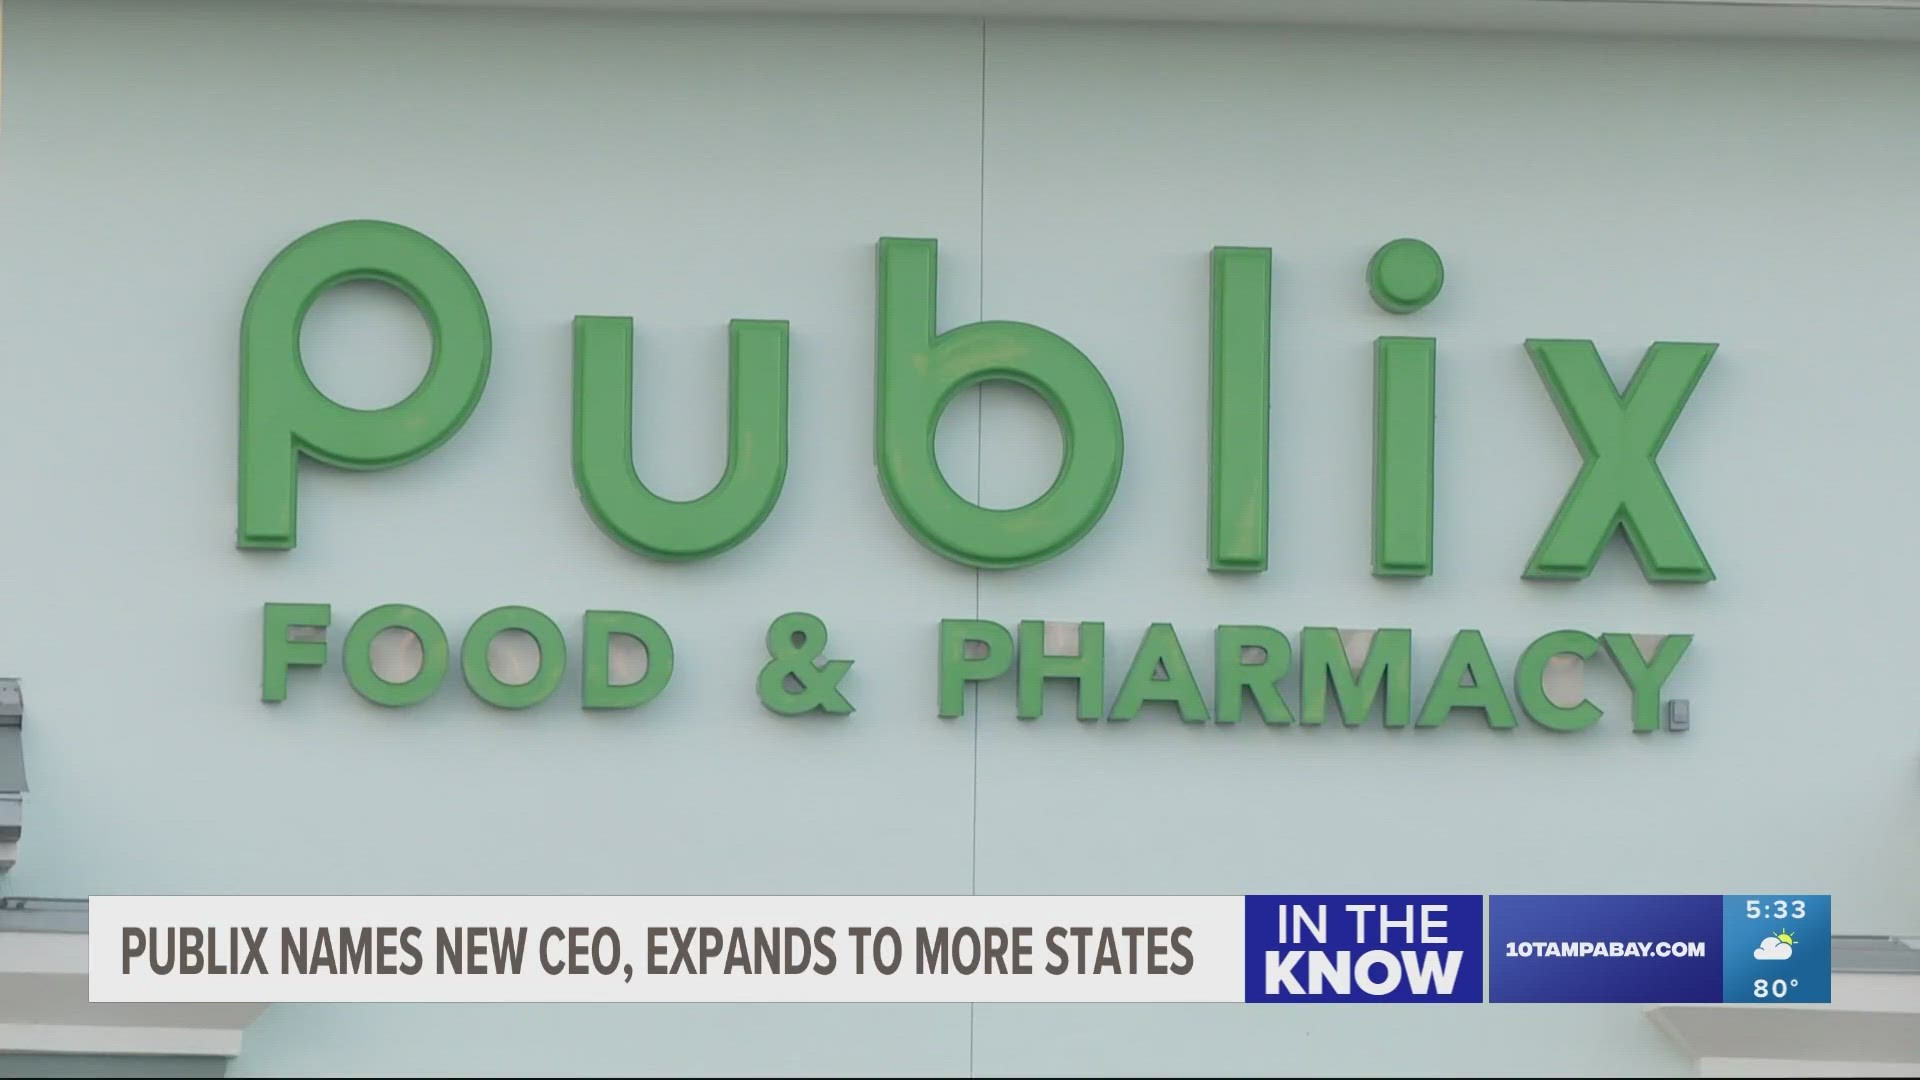 The change comes as Publix looks to expand its footprint across more states.